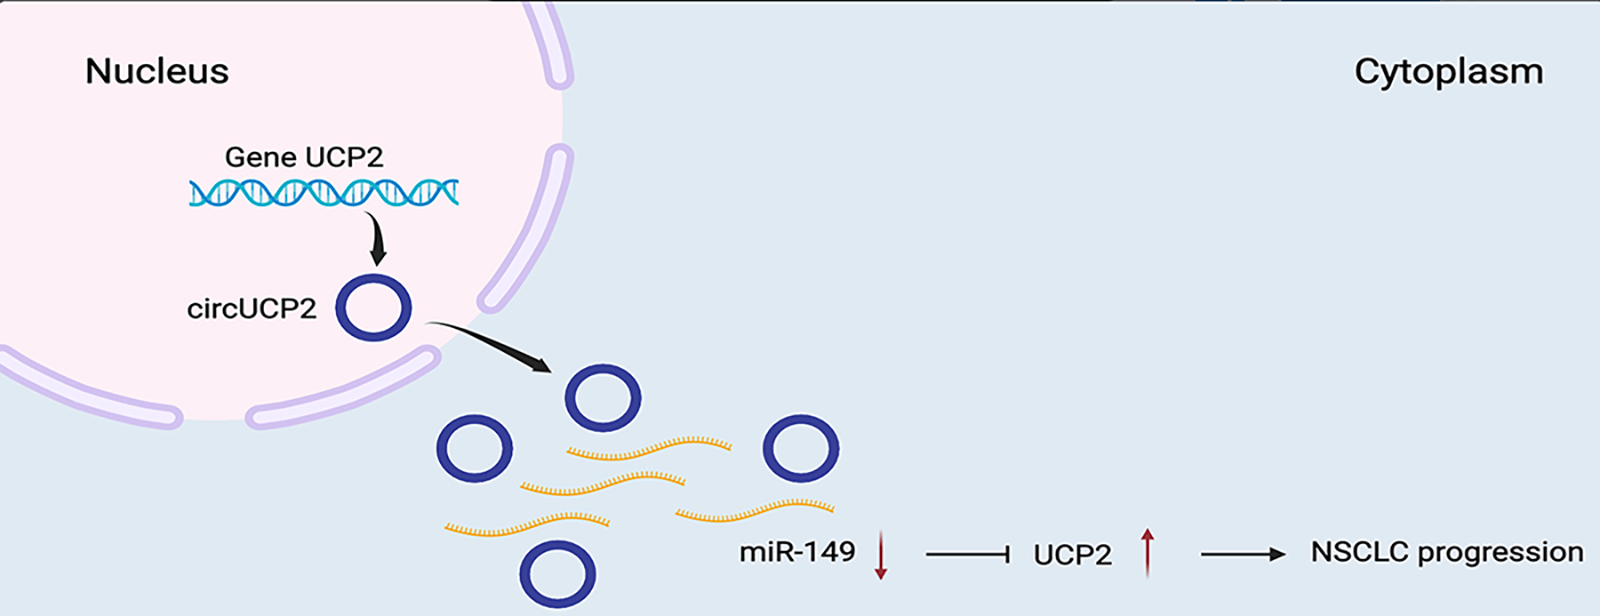 CircUCP2 promotes the tumor progression of non-small cell lung cancer through the miR-149/UCP2 pathway